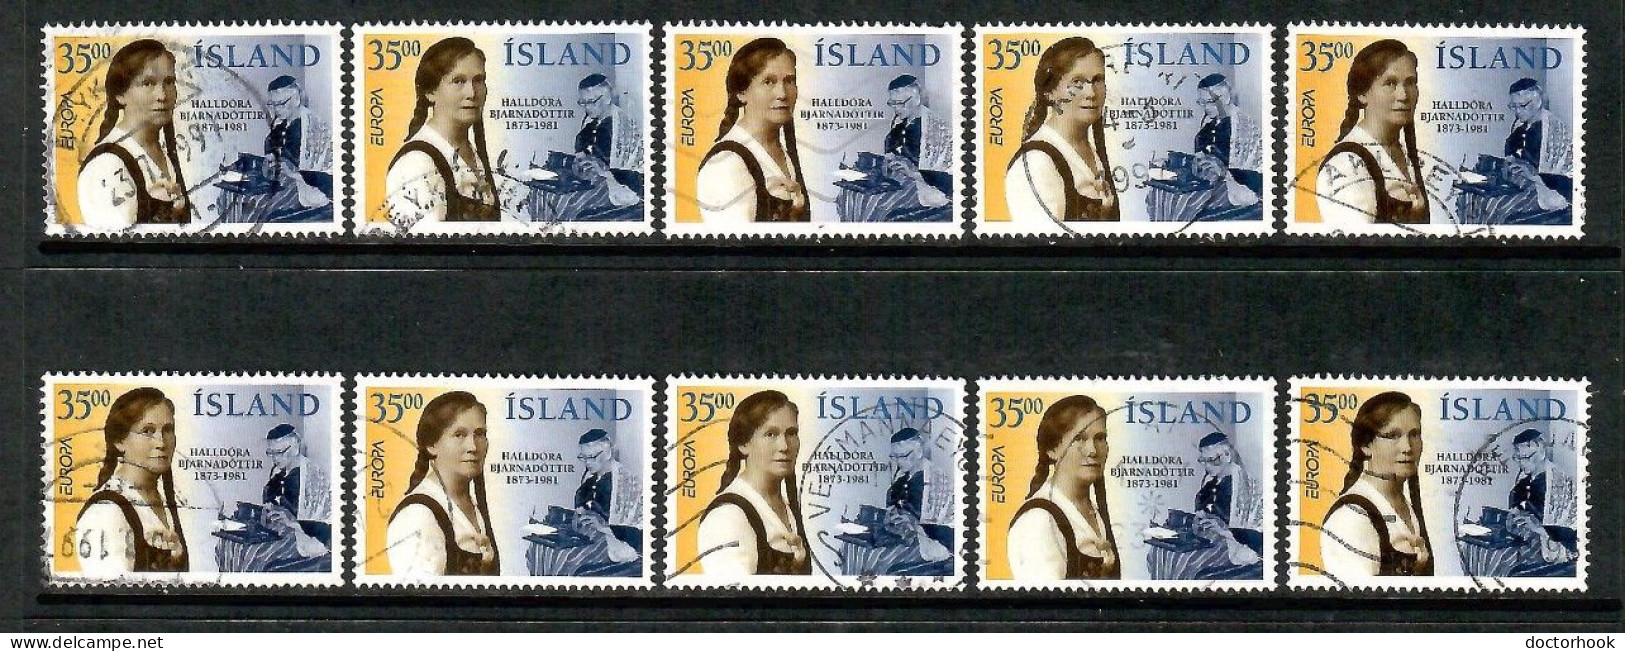 ICELAND   Scott # 818 USED WHOLESALE LOT OF 10 (CONDITION AS PER SCAN) (WH-628) - Collections, Lots & Séries